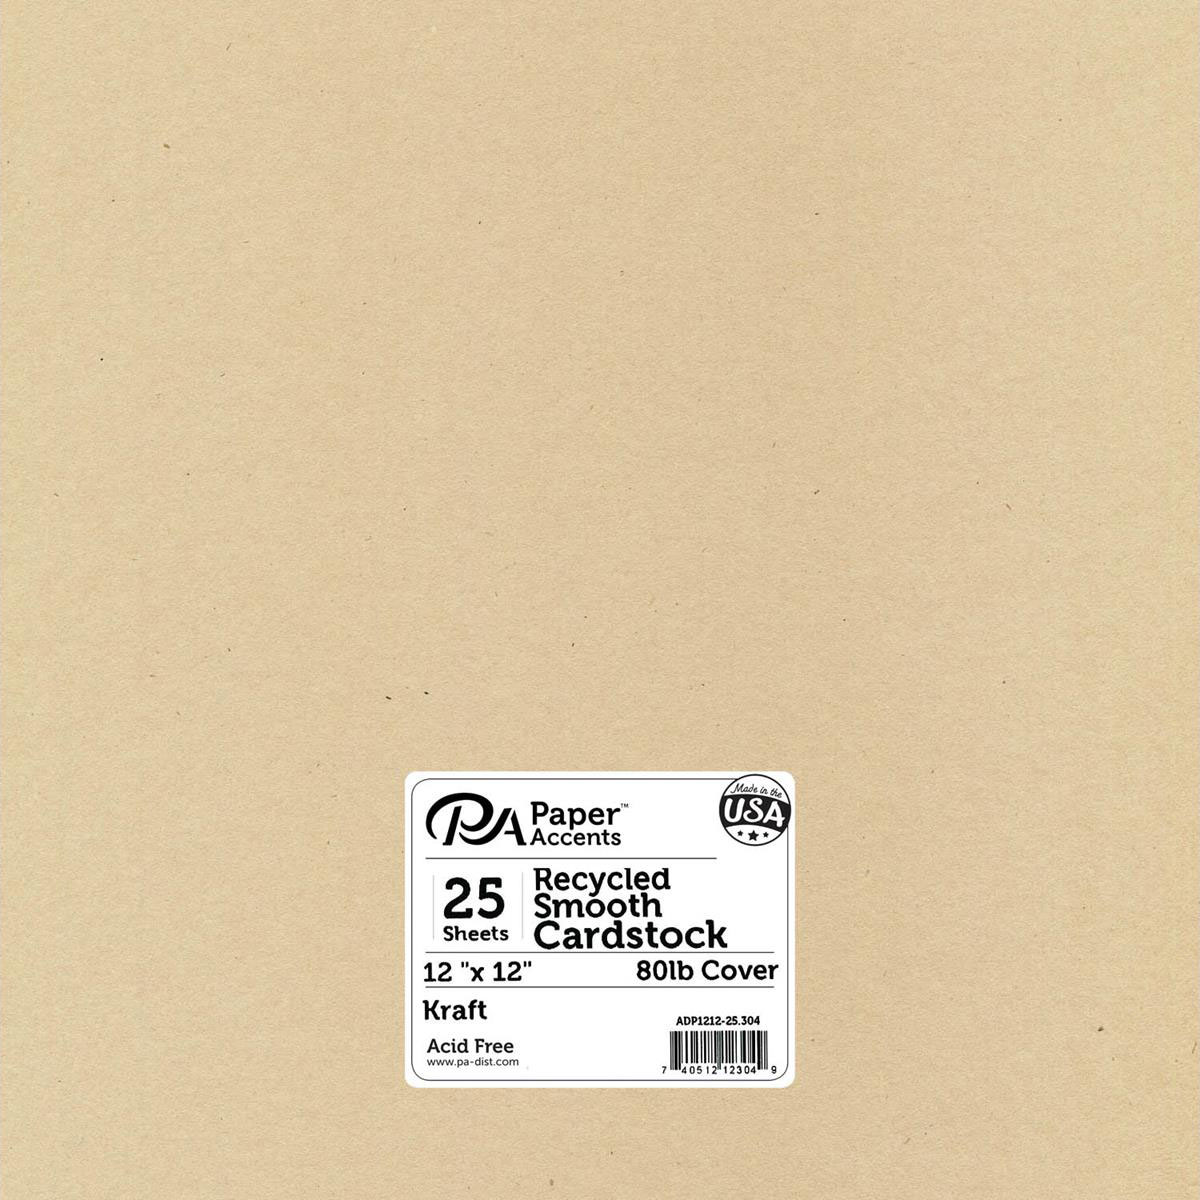 Paper Accents Cdstk Recycled 12x12 80lb Kraft